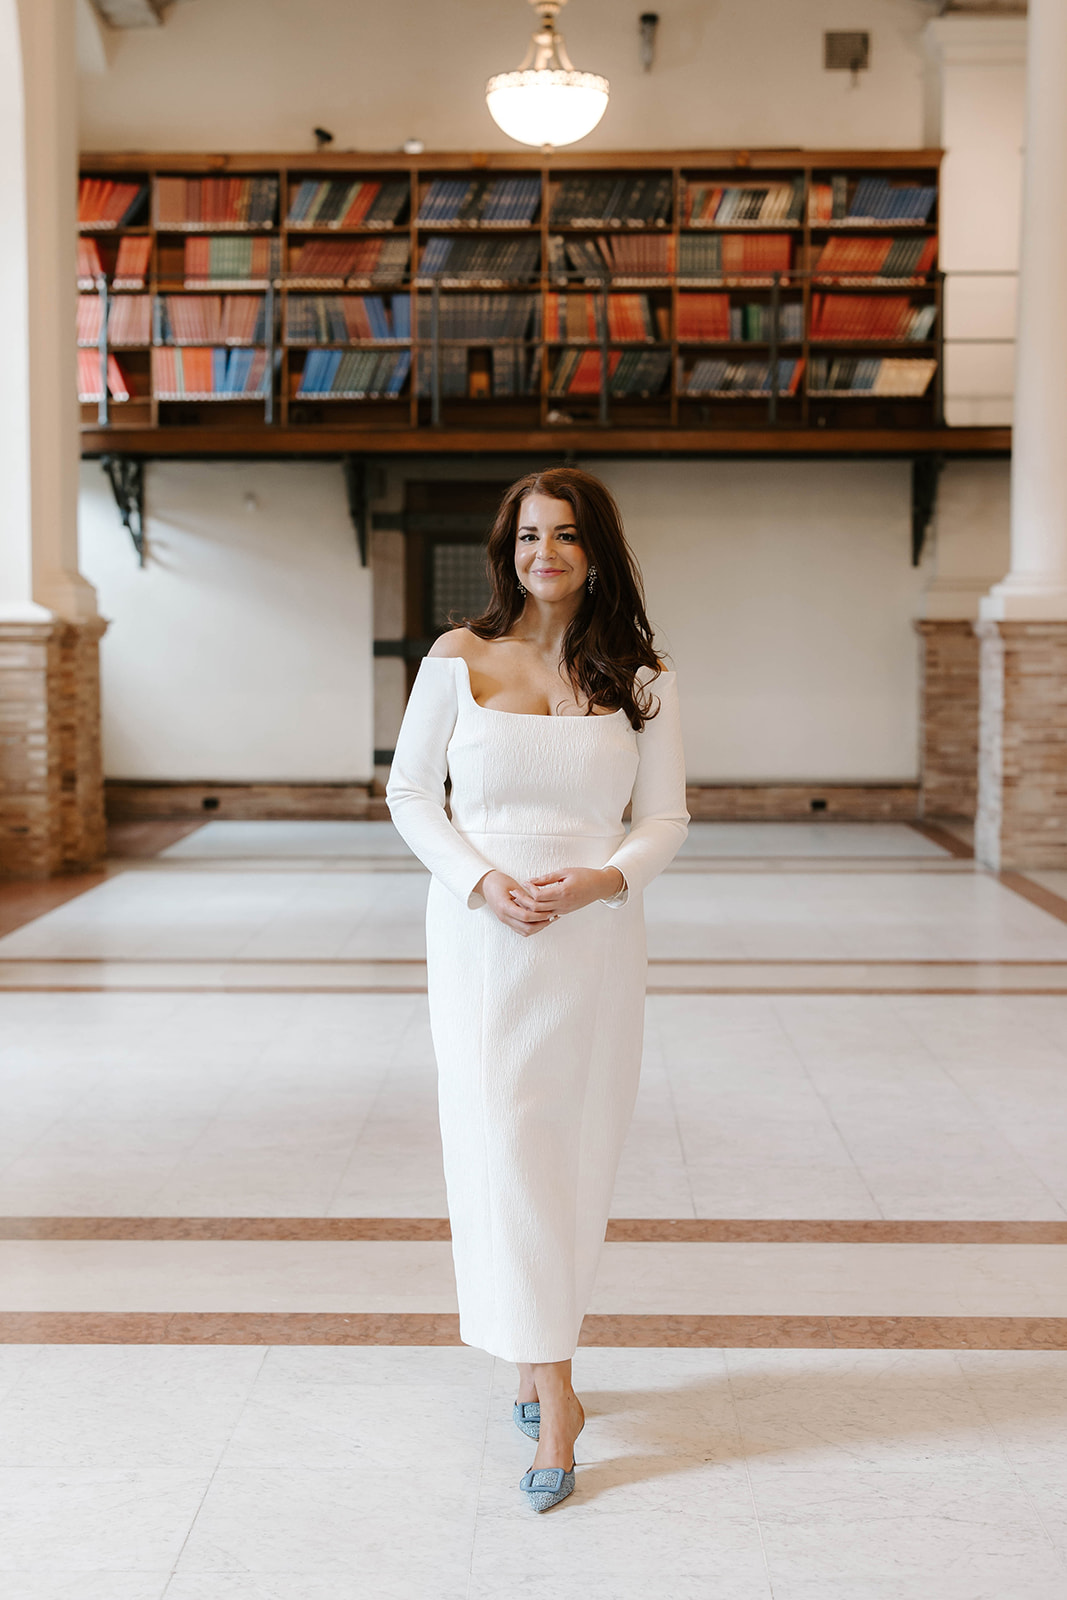 Beautiful bride poses in the Boston public library on her wedding day!